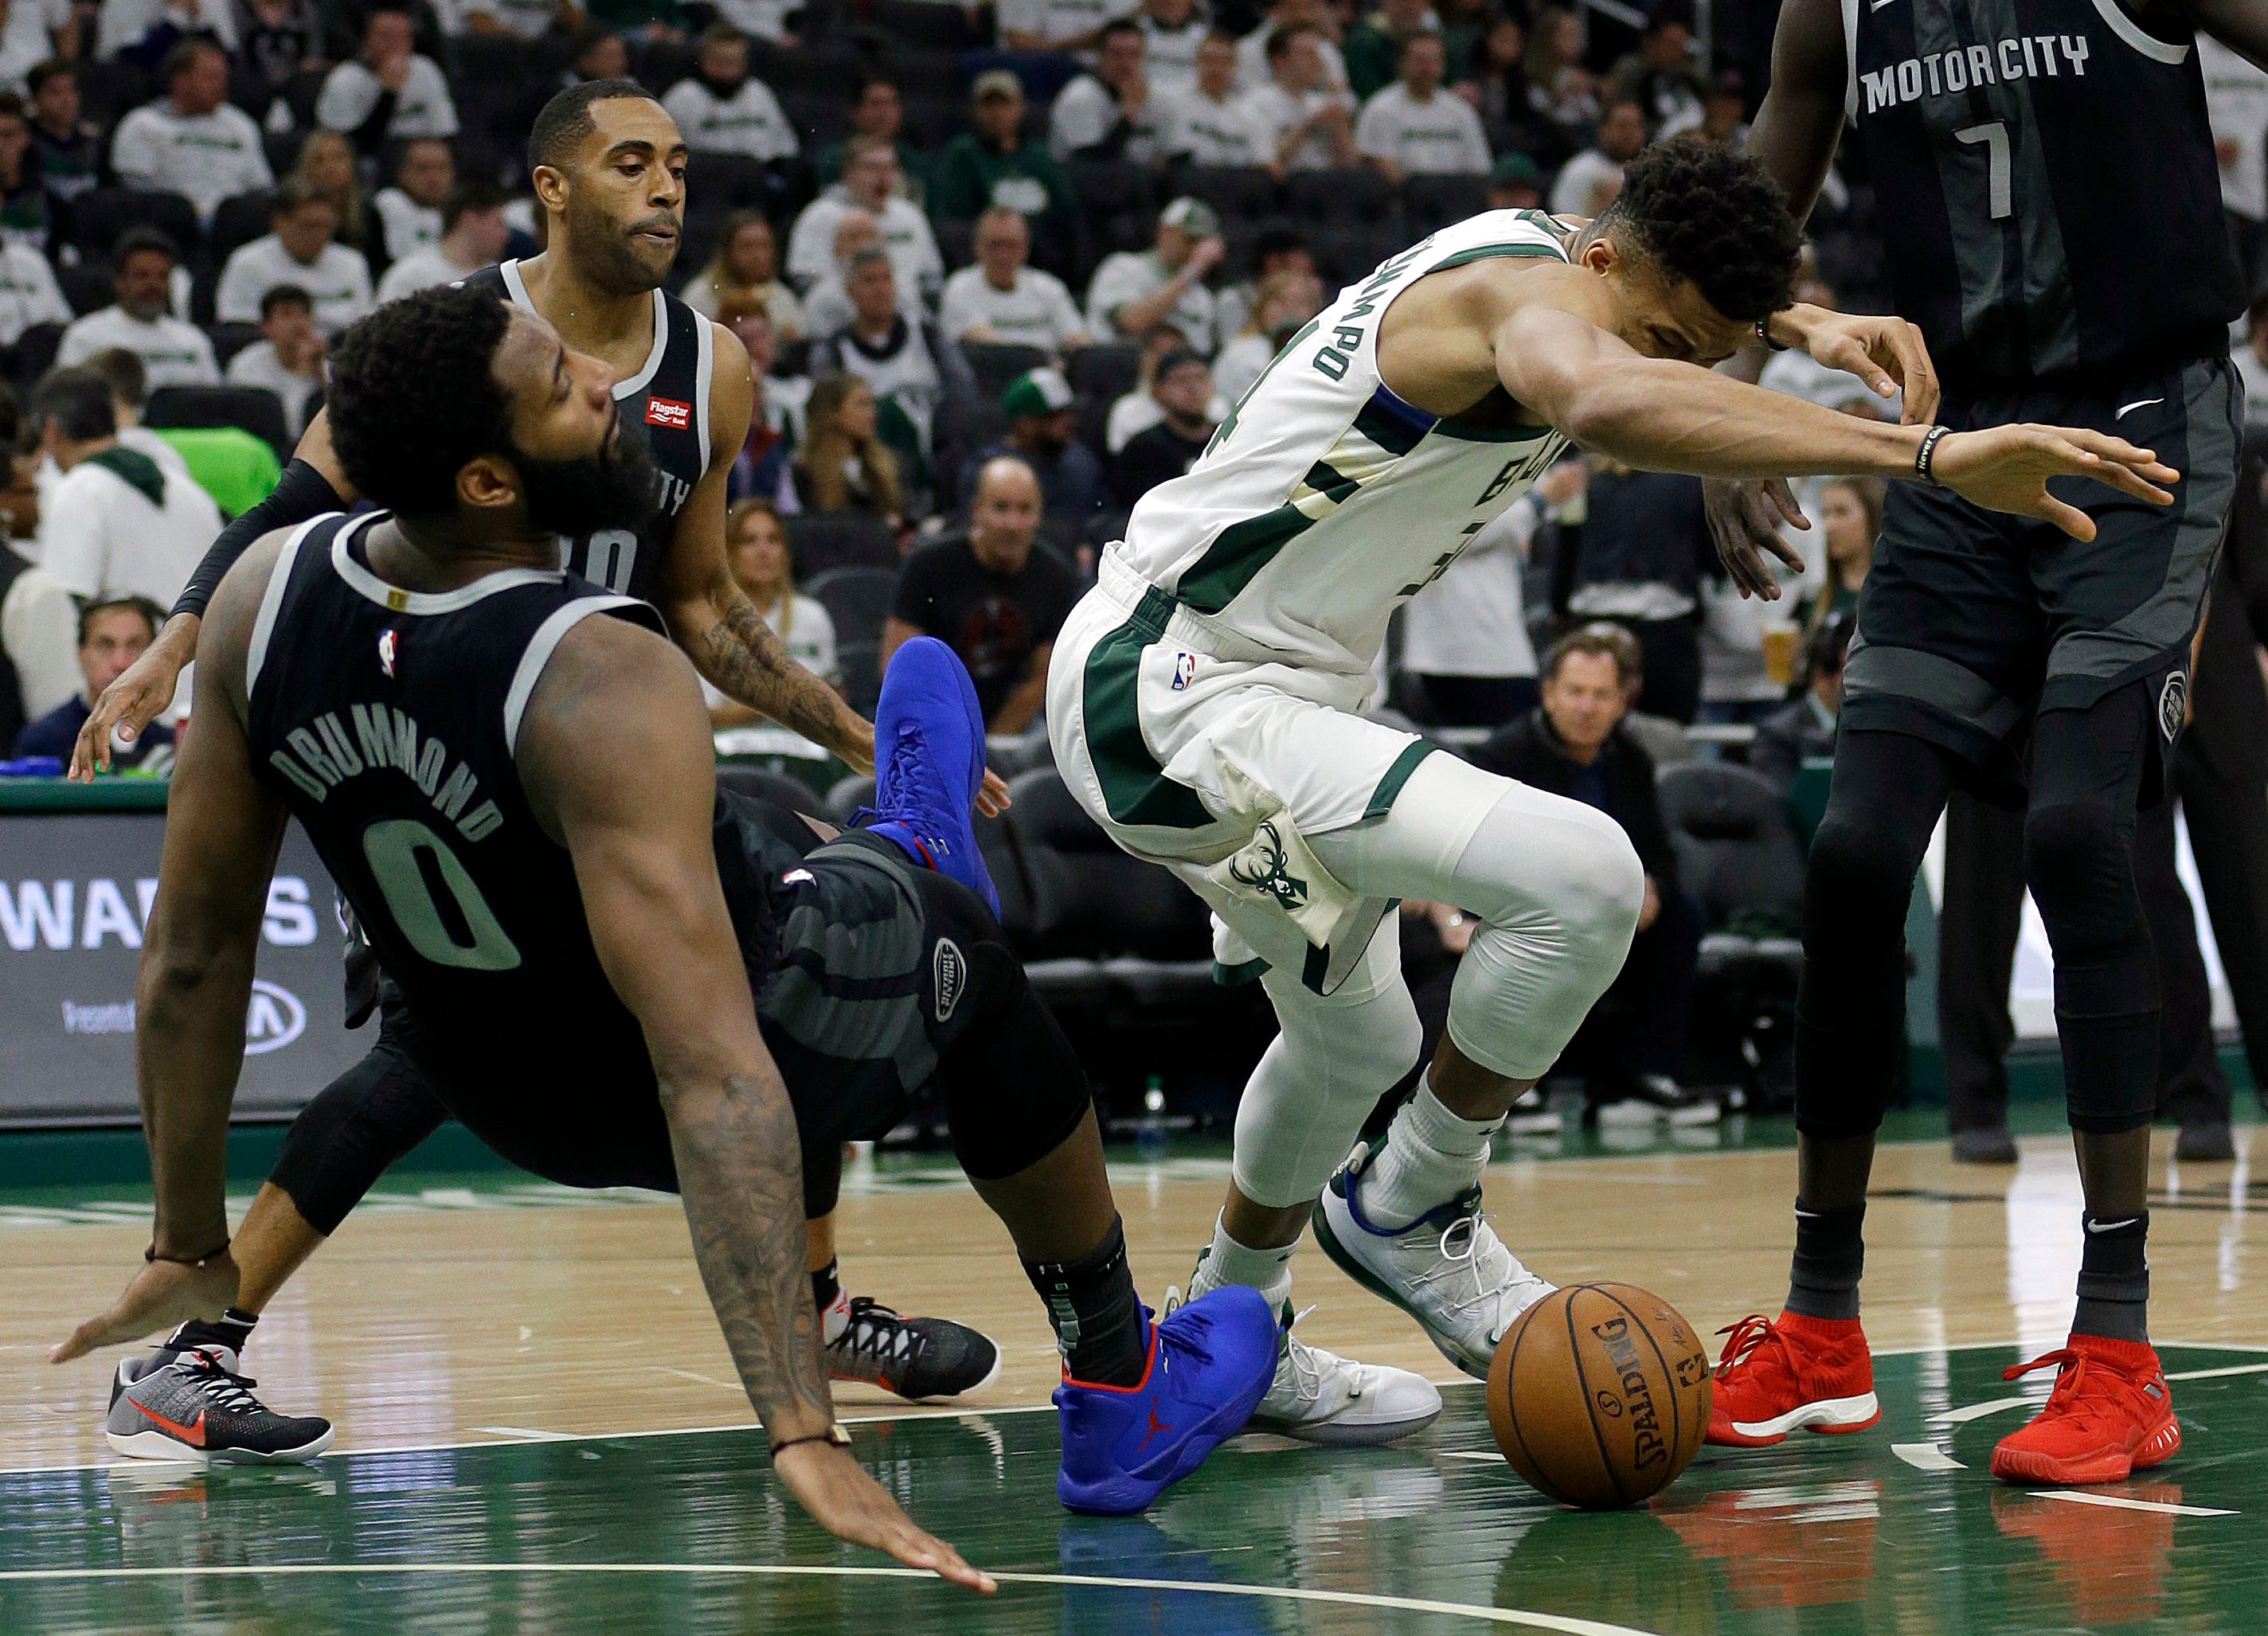 Bucks ' Giannis Antetokounmpo commits an offensive foul against Pistons ' Andre Drummond during the second half.